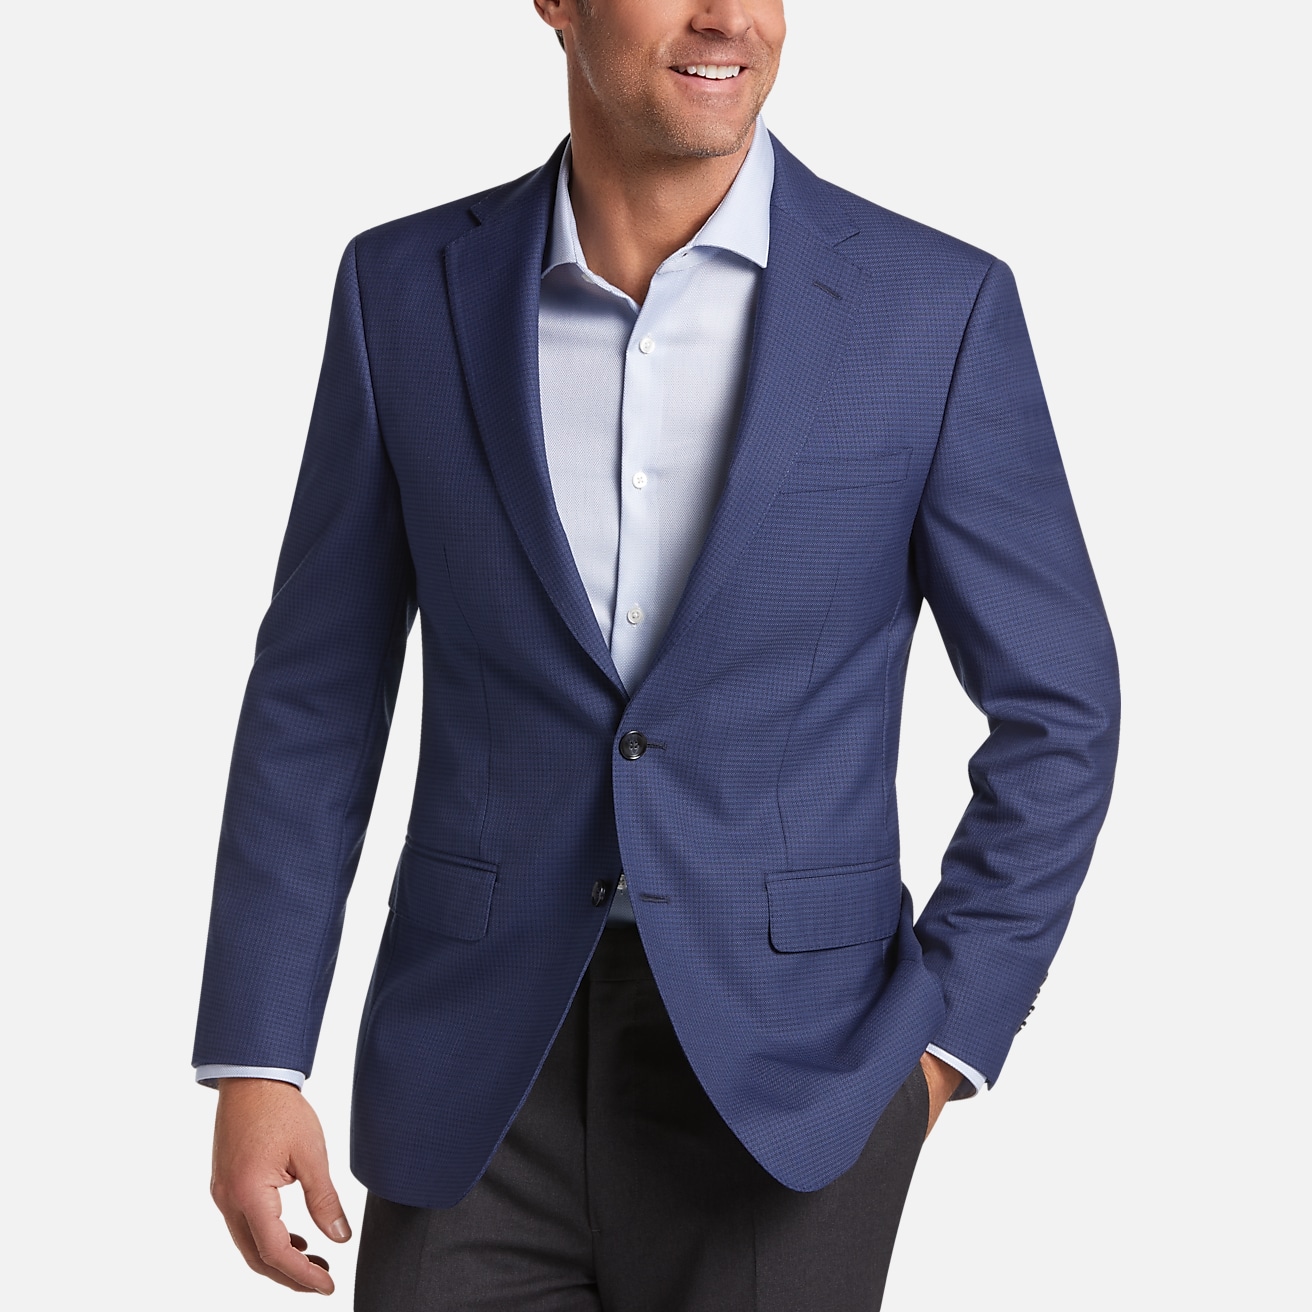 https://image.menswearhouse.com/is/image/TMW/TMW_15JA_14_CALVIN_KLEIN_SPORT_COATS_BLUE_MAIN?imPolicy=pdp-mob-2x